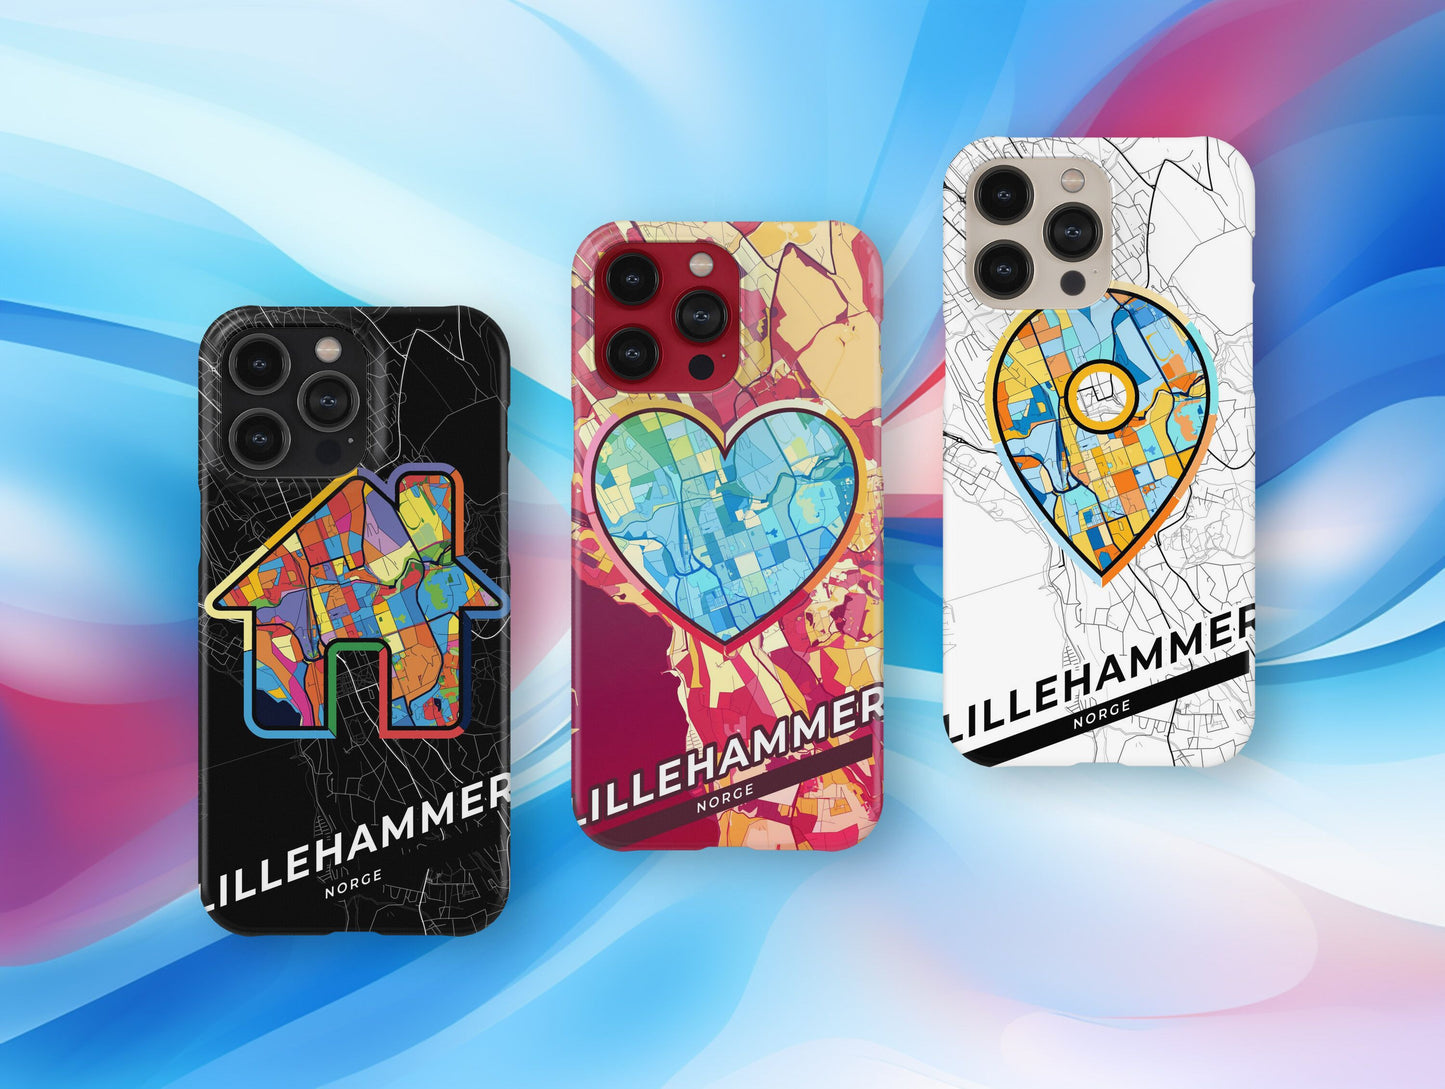 Lillehammer Norway slim phone case with colorful icon. Birthday, wedding or housewarming gift. Couple match cases.